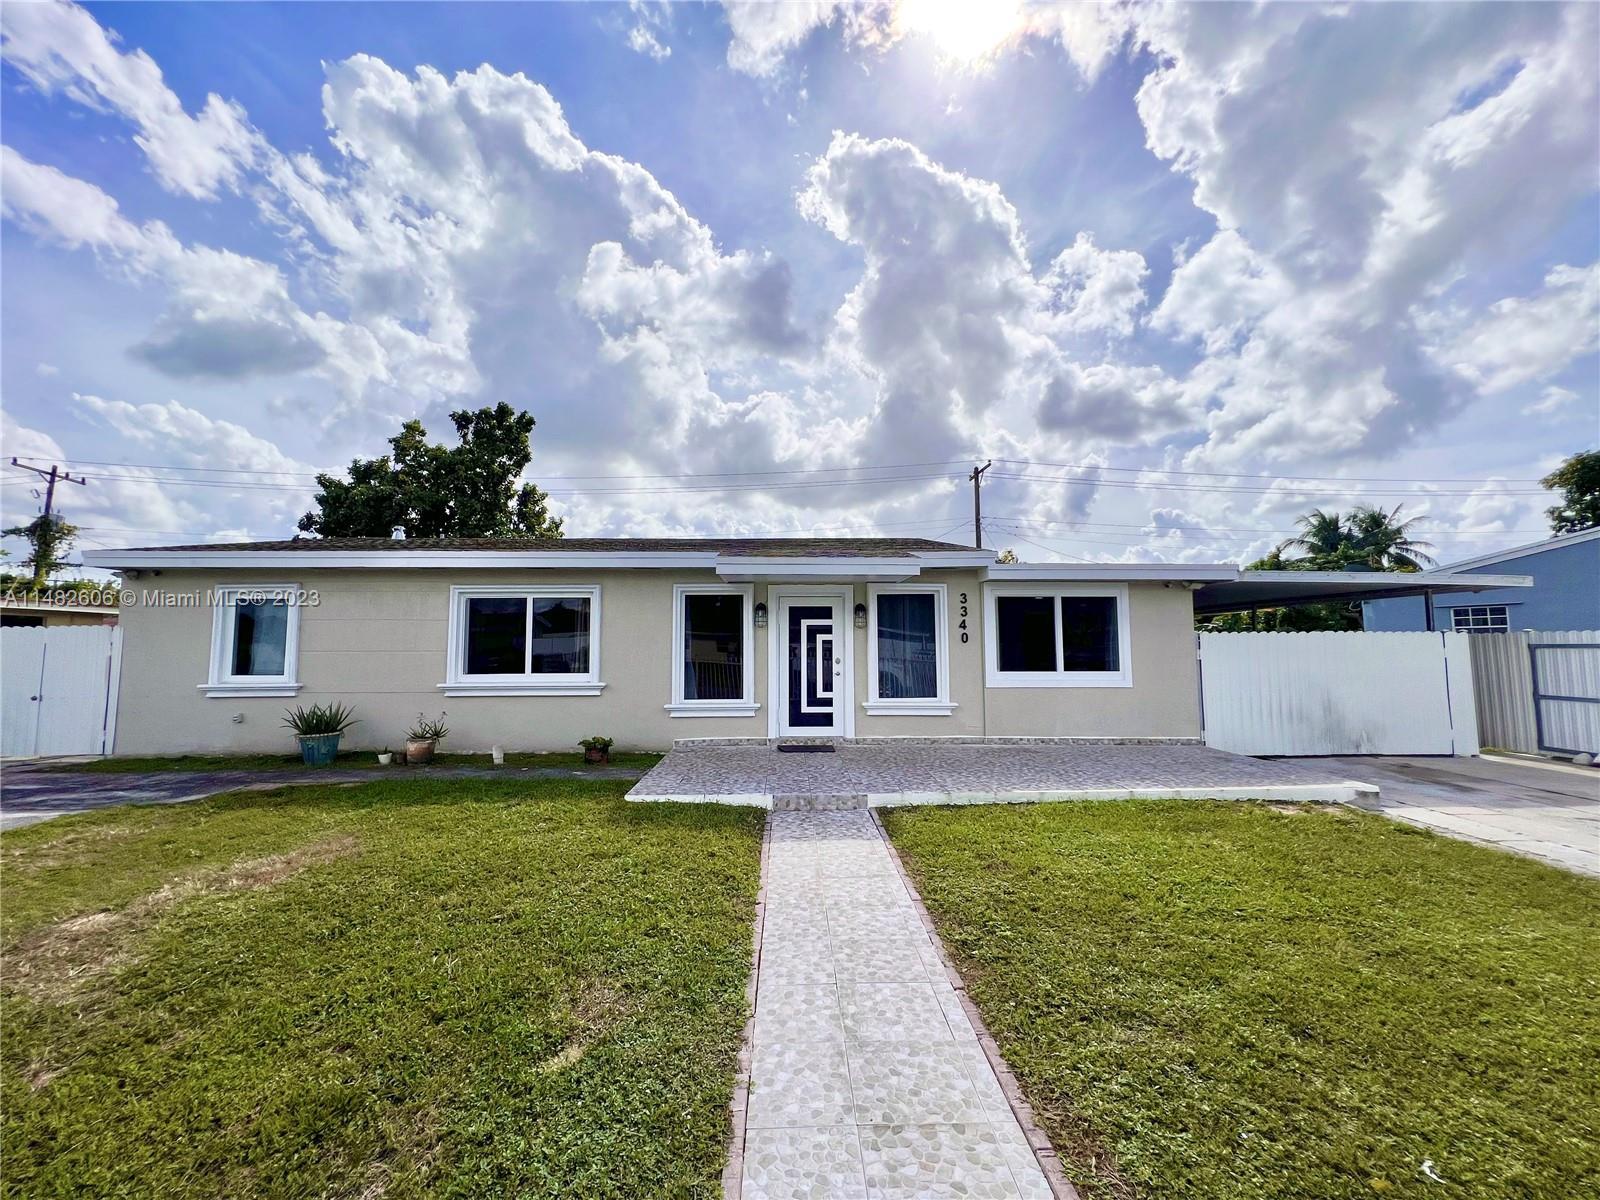 Photo of 3340 NW 179th St in Miami Gardens, FL